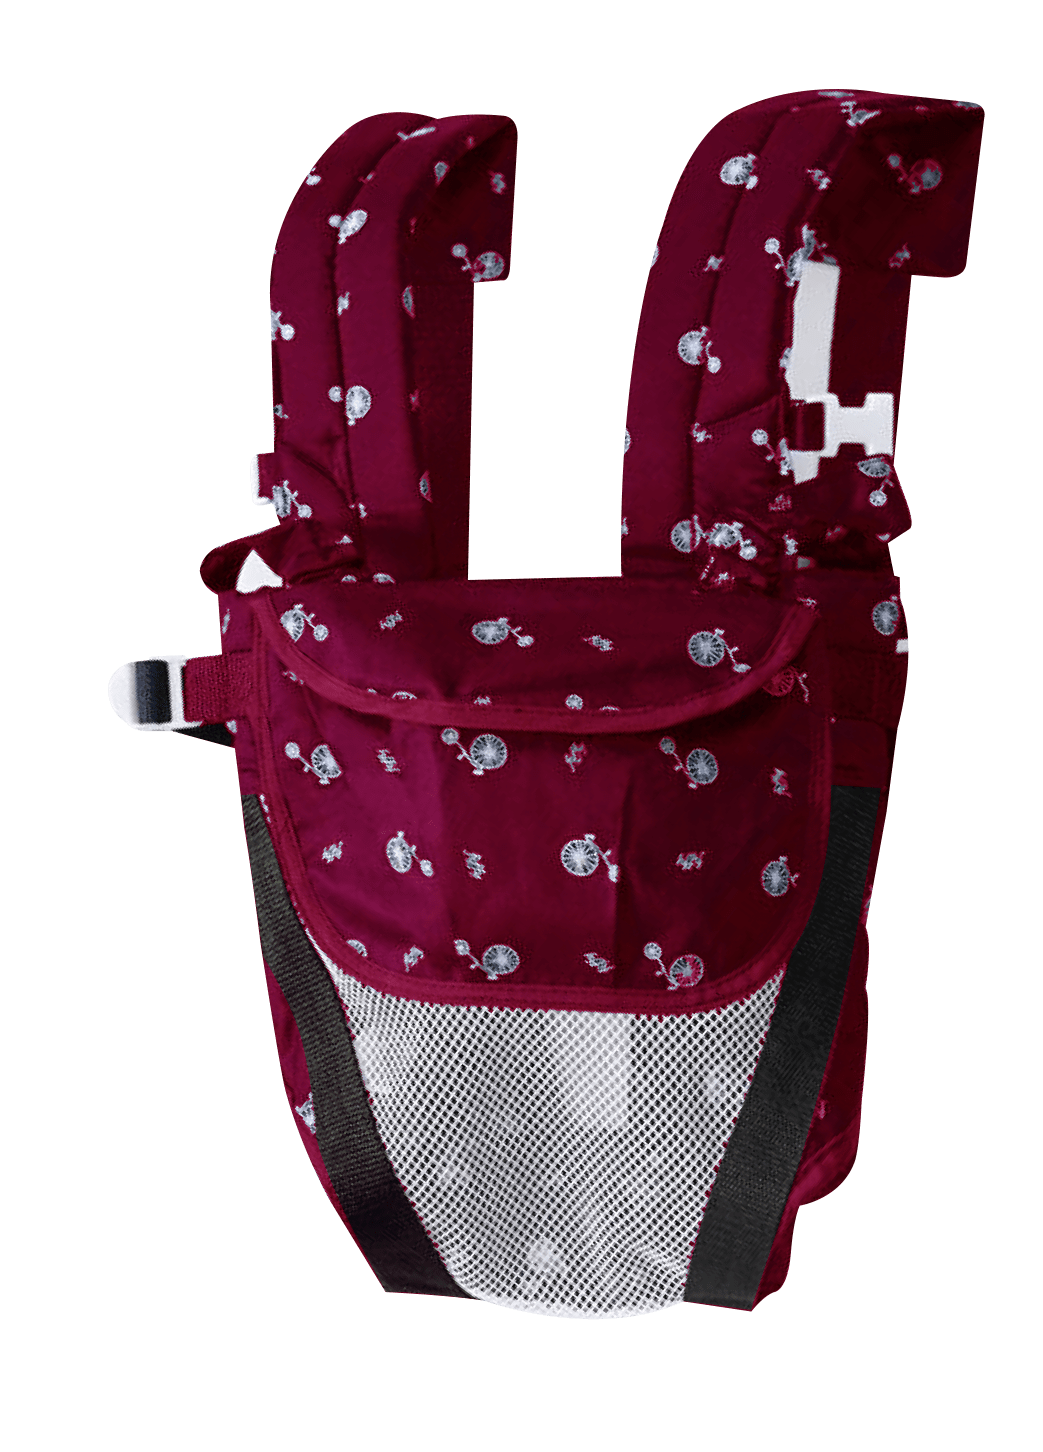 FIFFY BABY CARRIER 6 IN 1